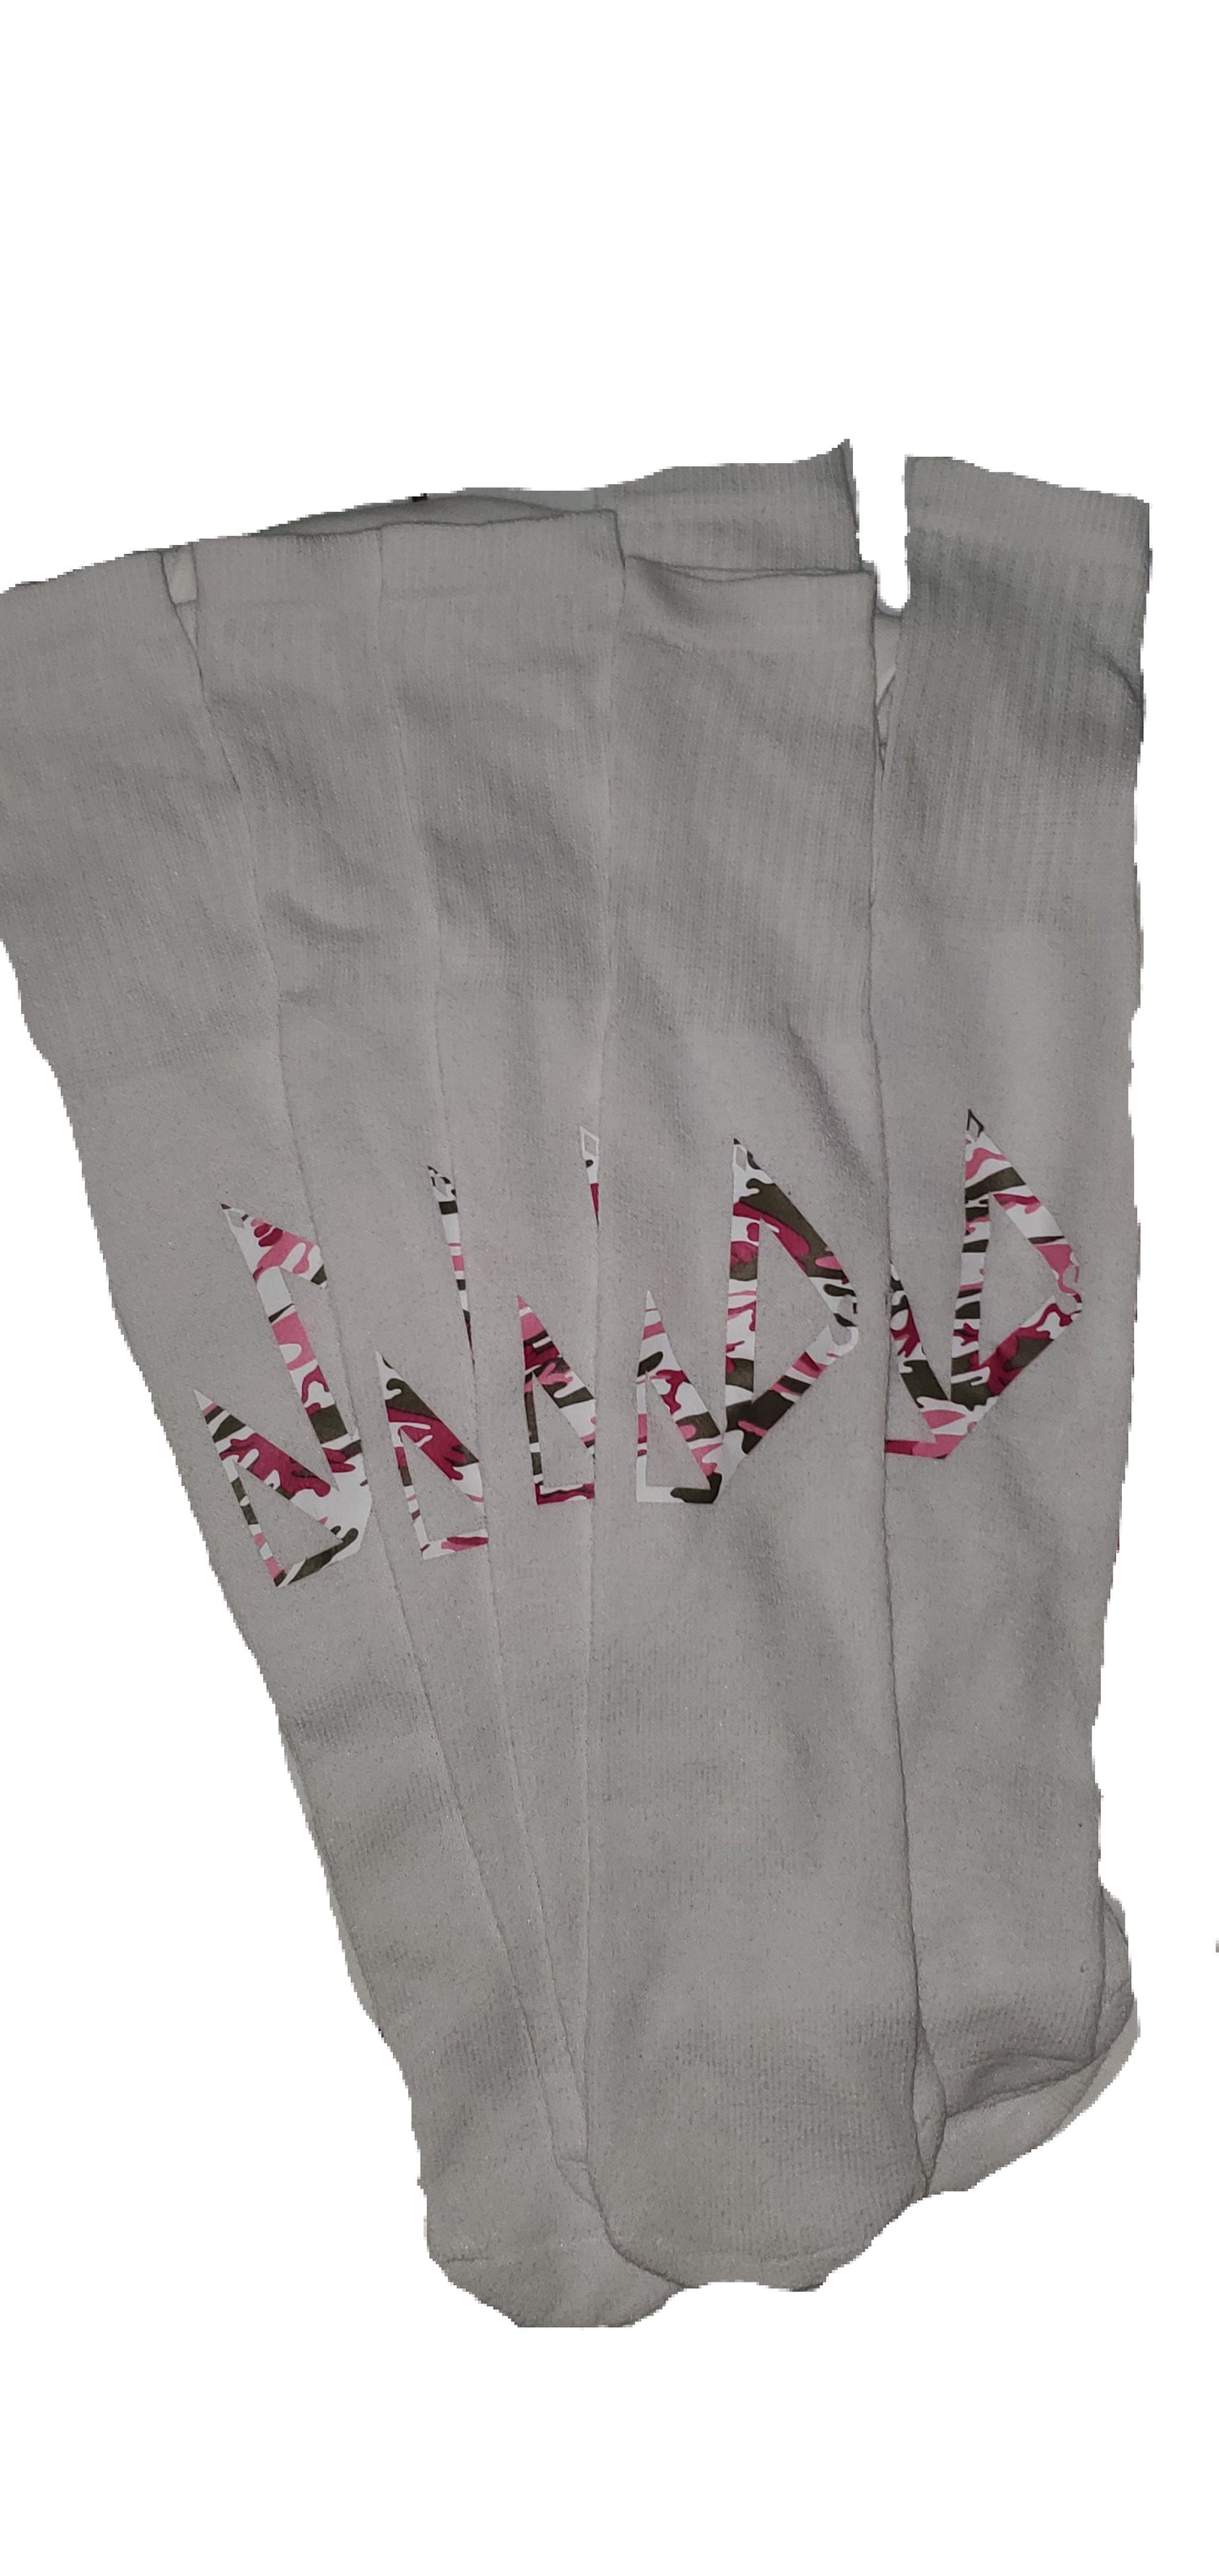 PINK CAMOUFLAGE ON WHITE/1 PAIR OF WHITE ON PINK CAMOUFLAGE SOCKS SIZE 9-15